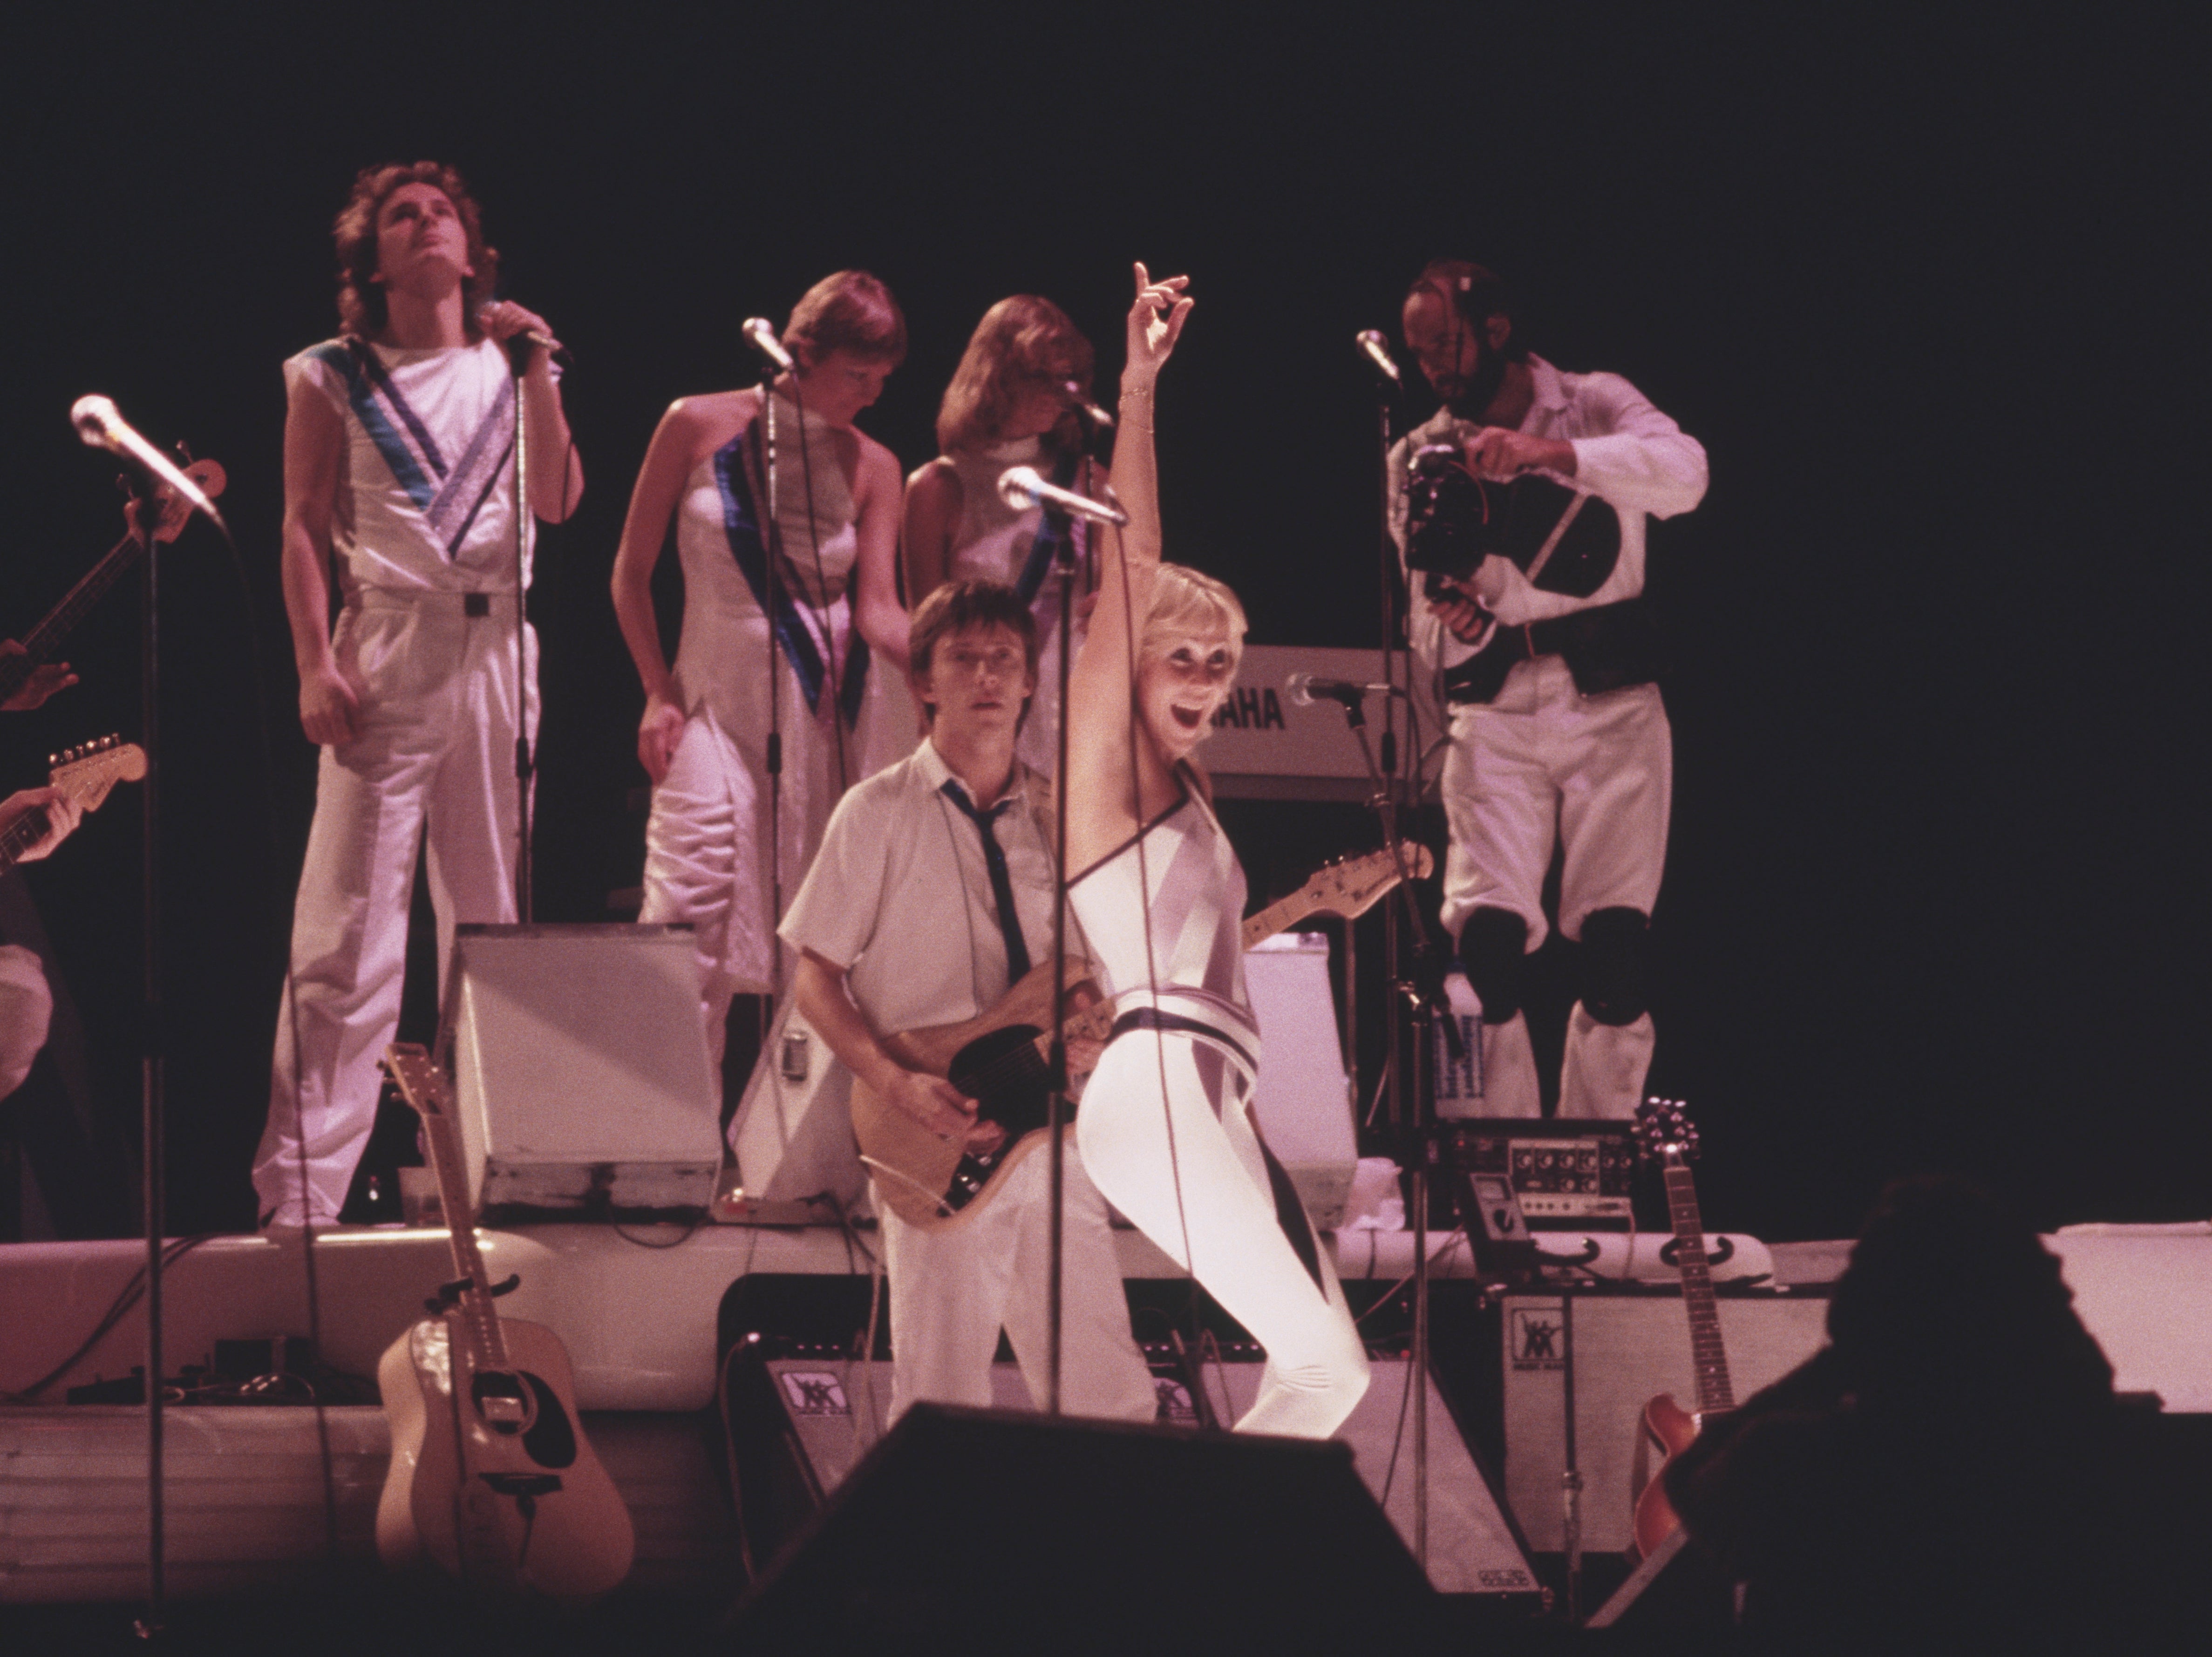 Abba performing in 1979